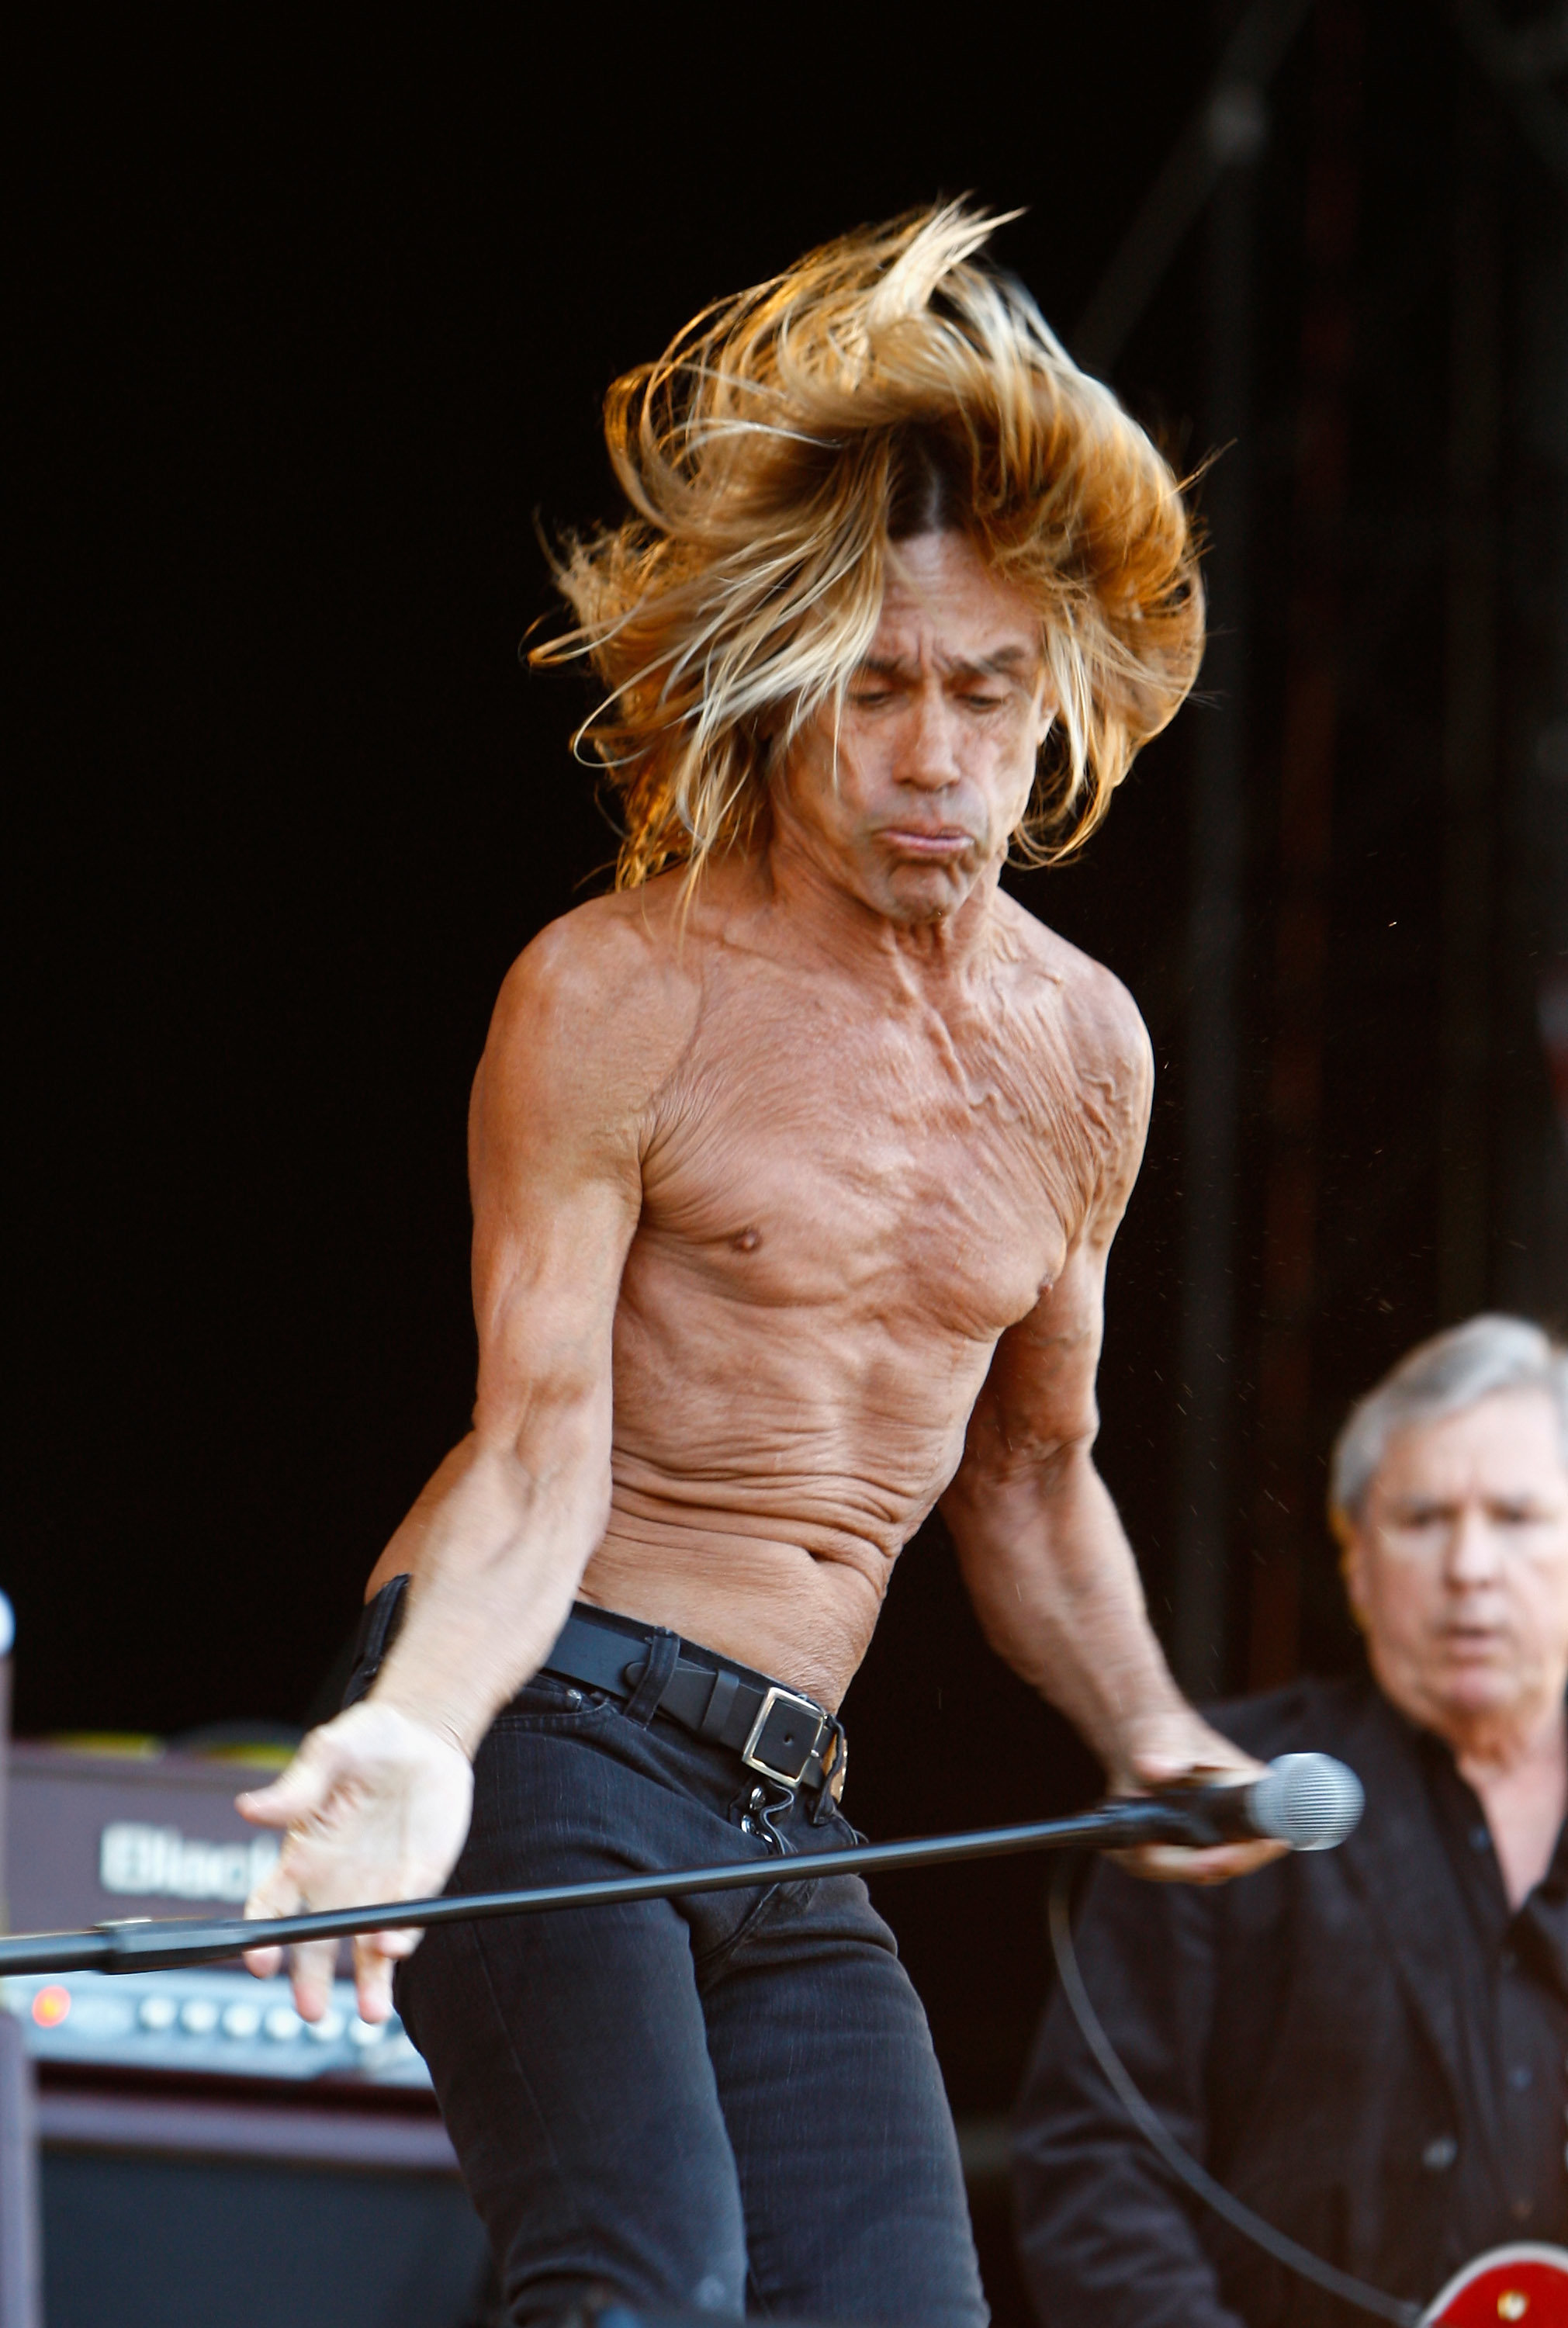 iggy pop and the stooges